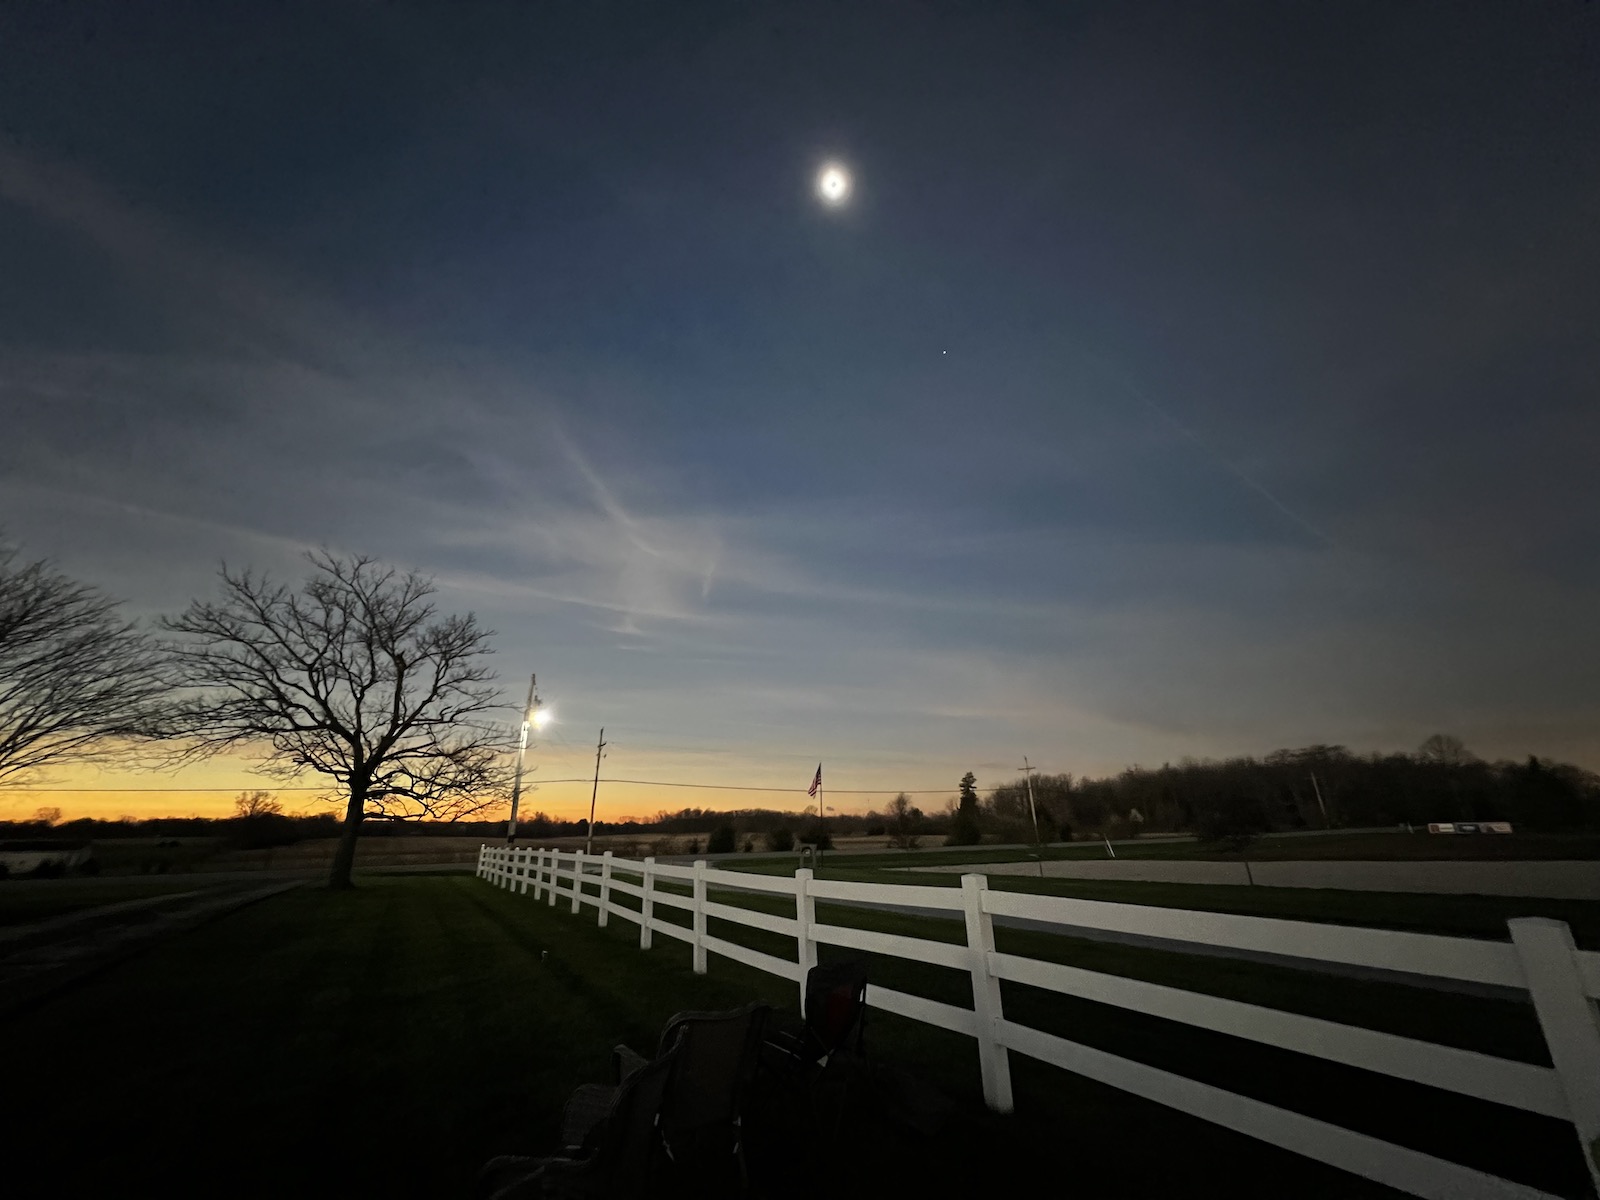 Eclipse totality and a 360 sunset over a white fence